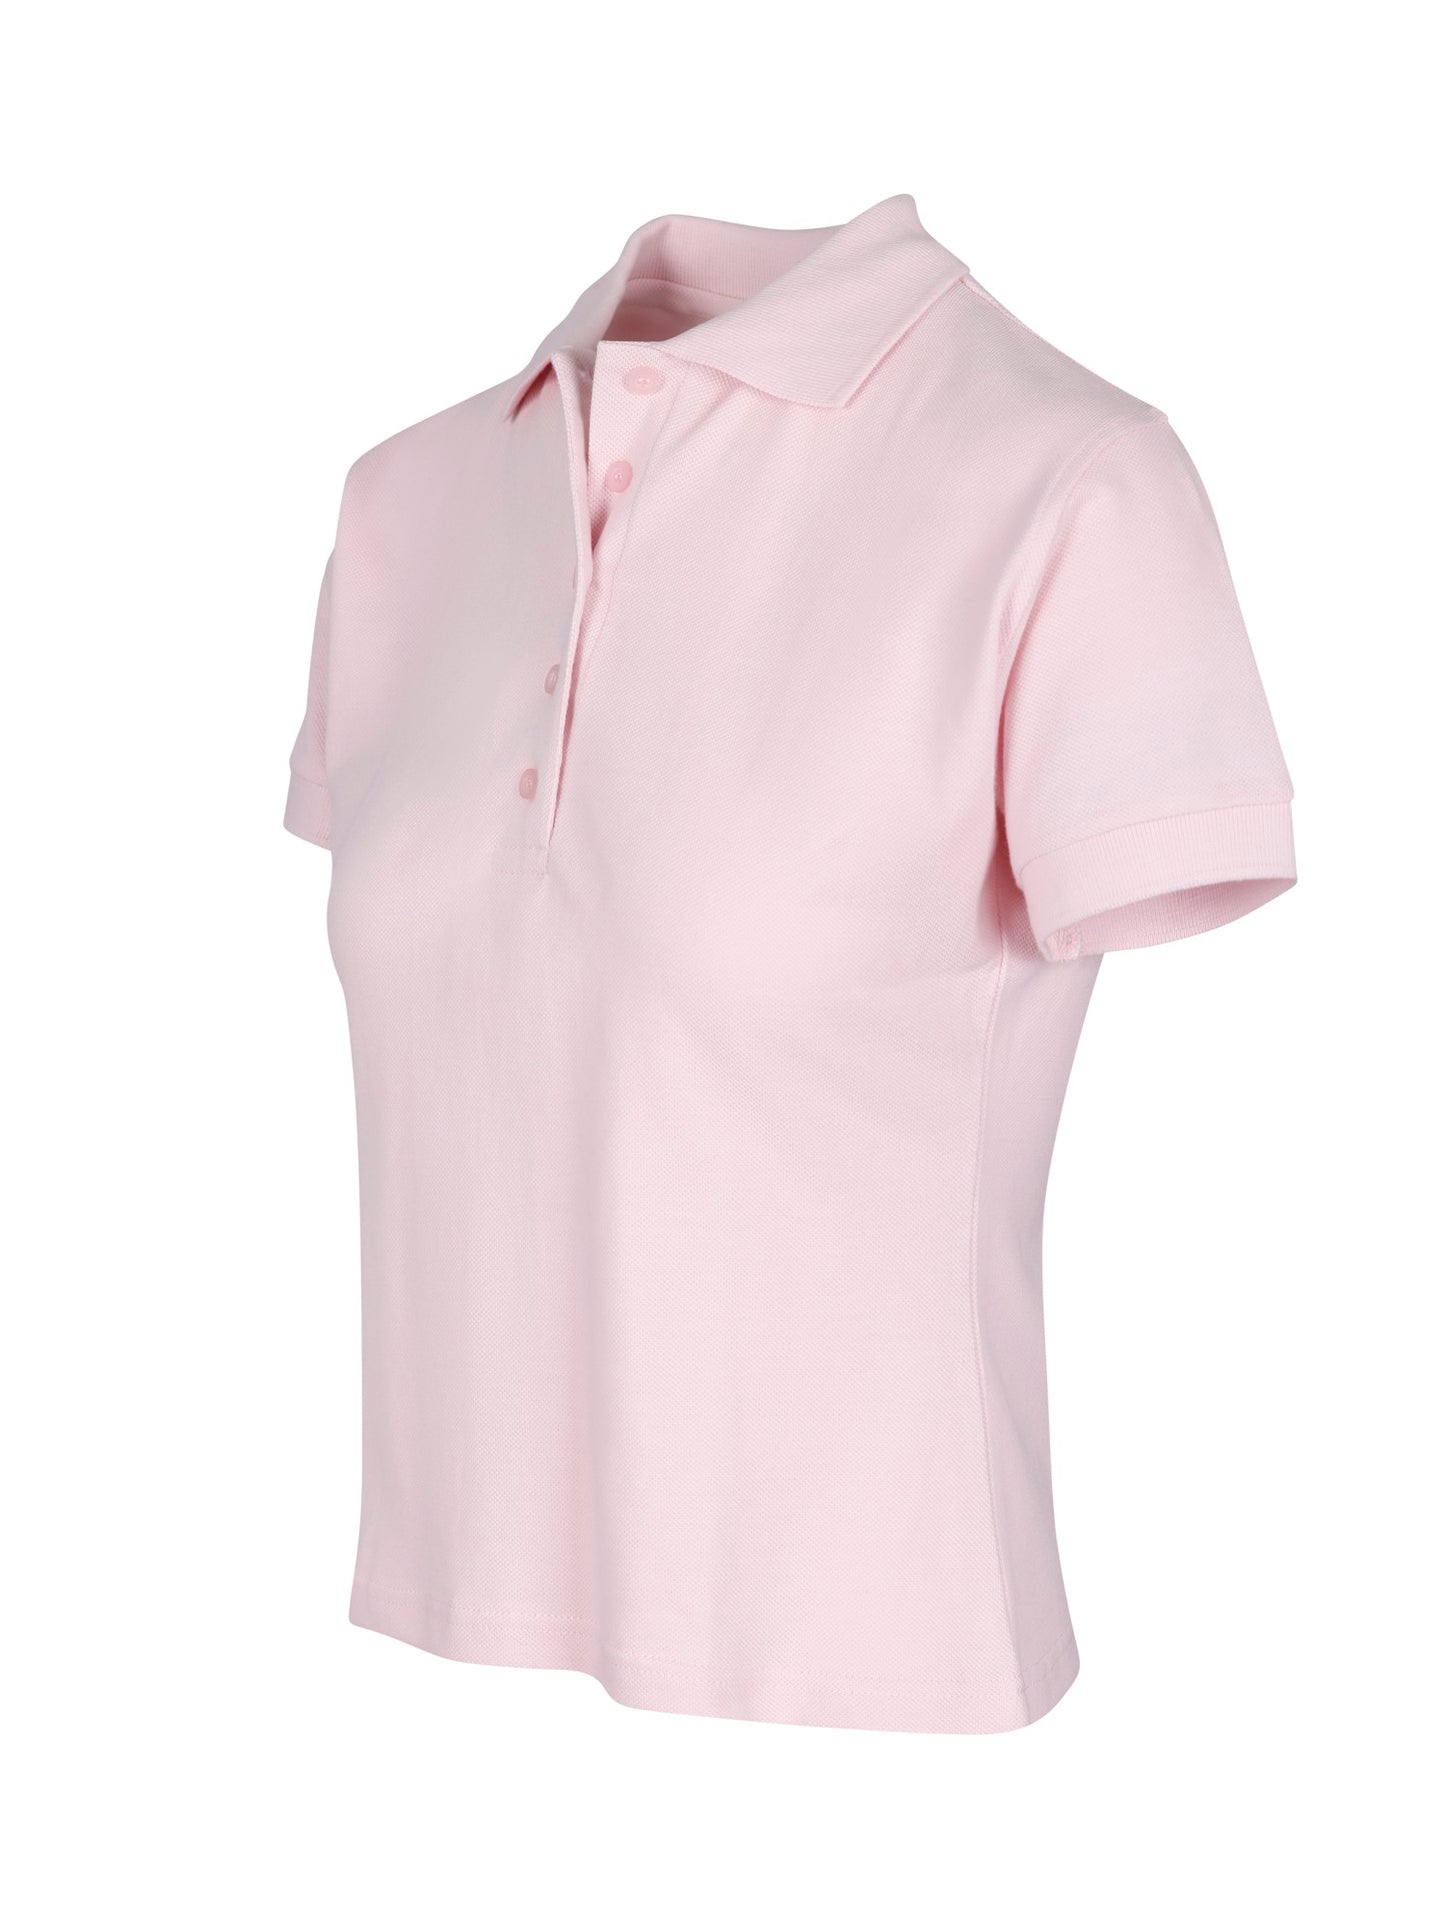 Ladies Soft Pink Polo